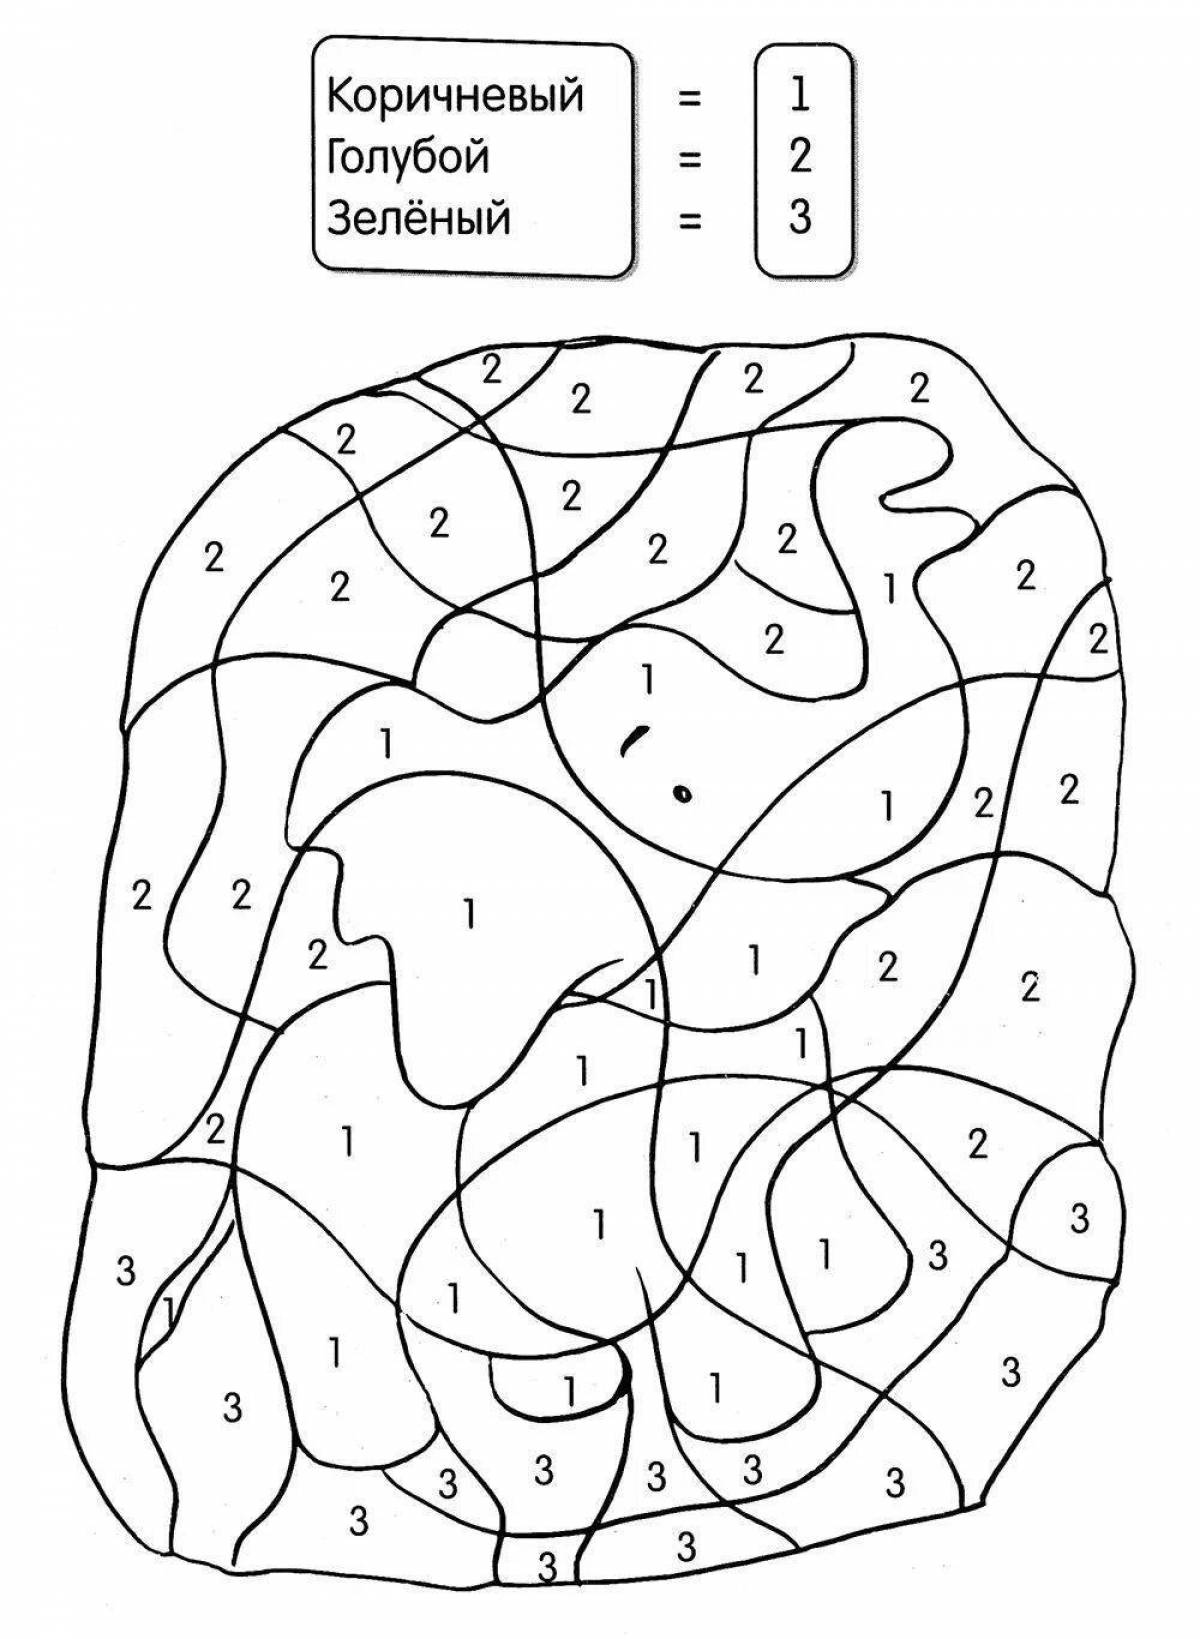 Fun letters coloring page